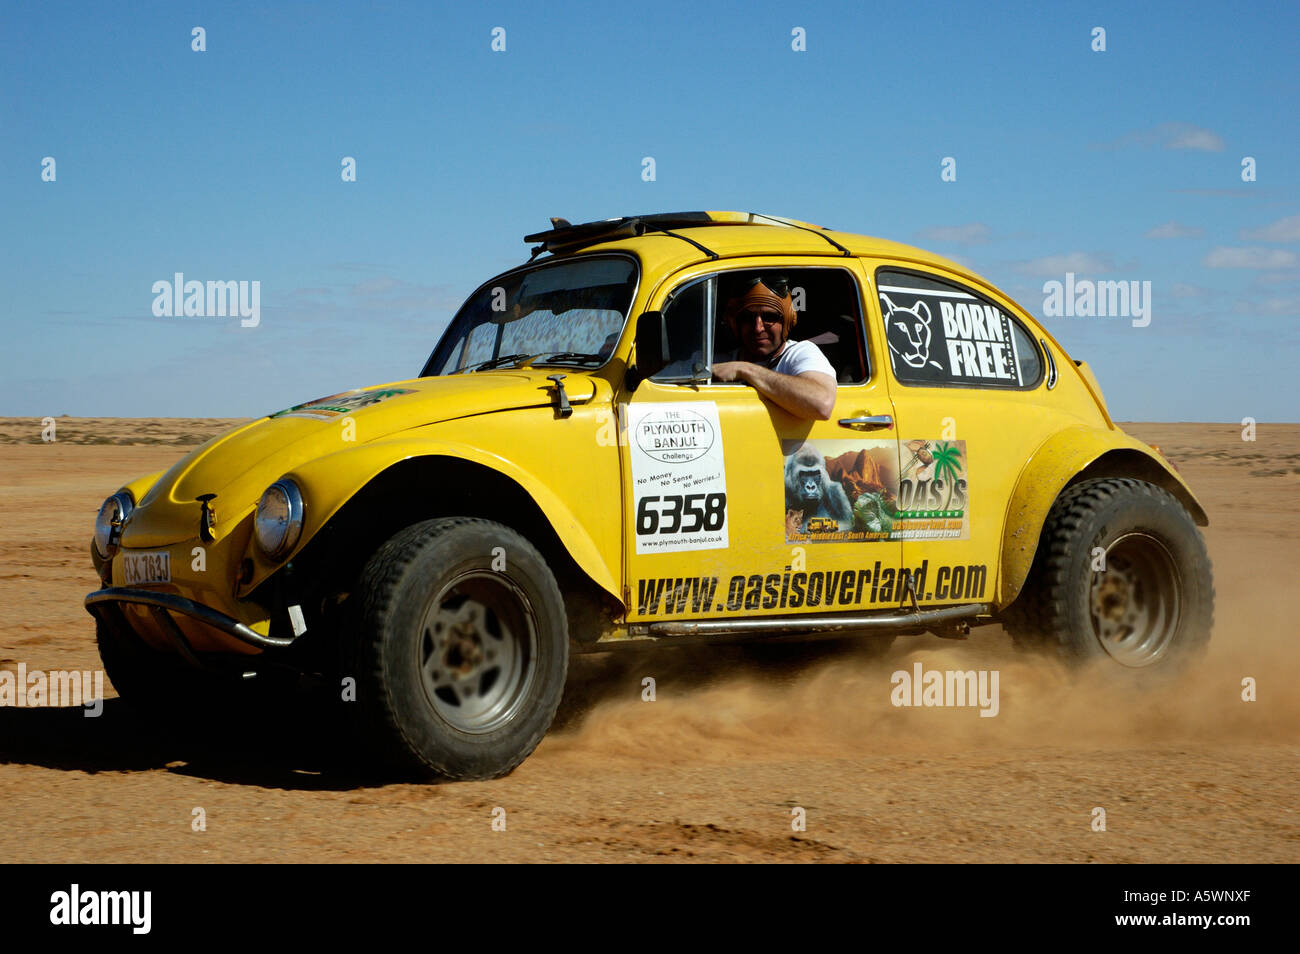 The Sandbug competitor in the 2005 Plymouth Banjul Challenge in Western Sahara desert Stock Photo